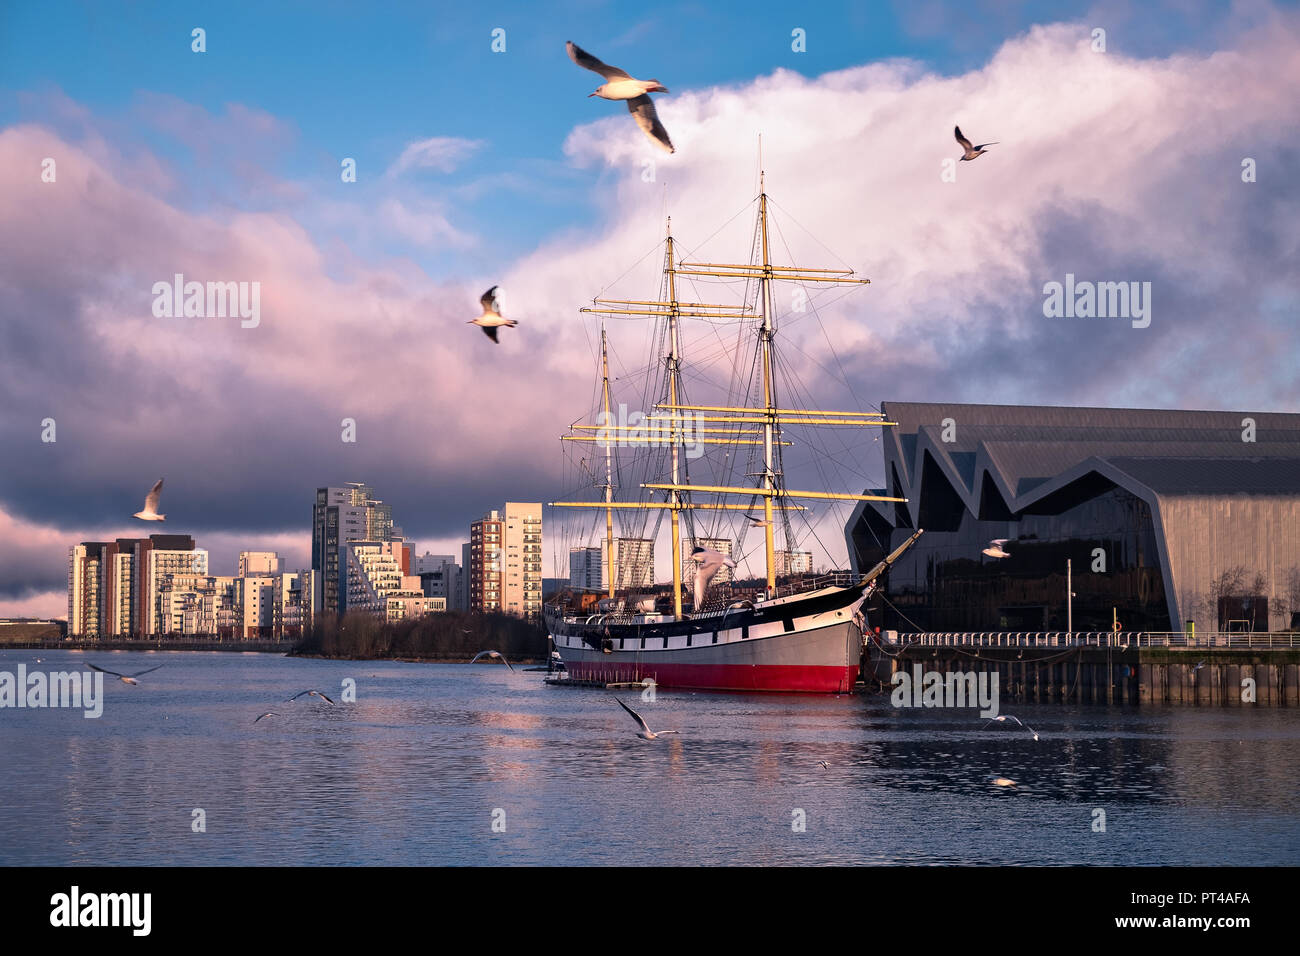 Morning view on the river Clyde and Glenlee, steel-hulled three-masted barque. The Tall Ship at Glasgow Harbour. Scotland Stock Photo